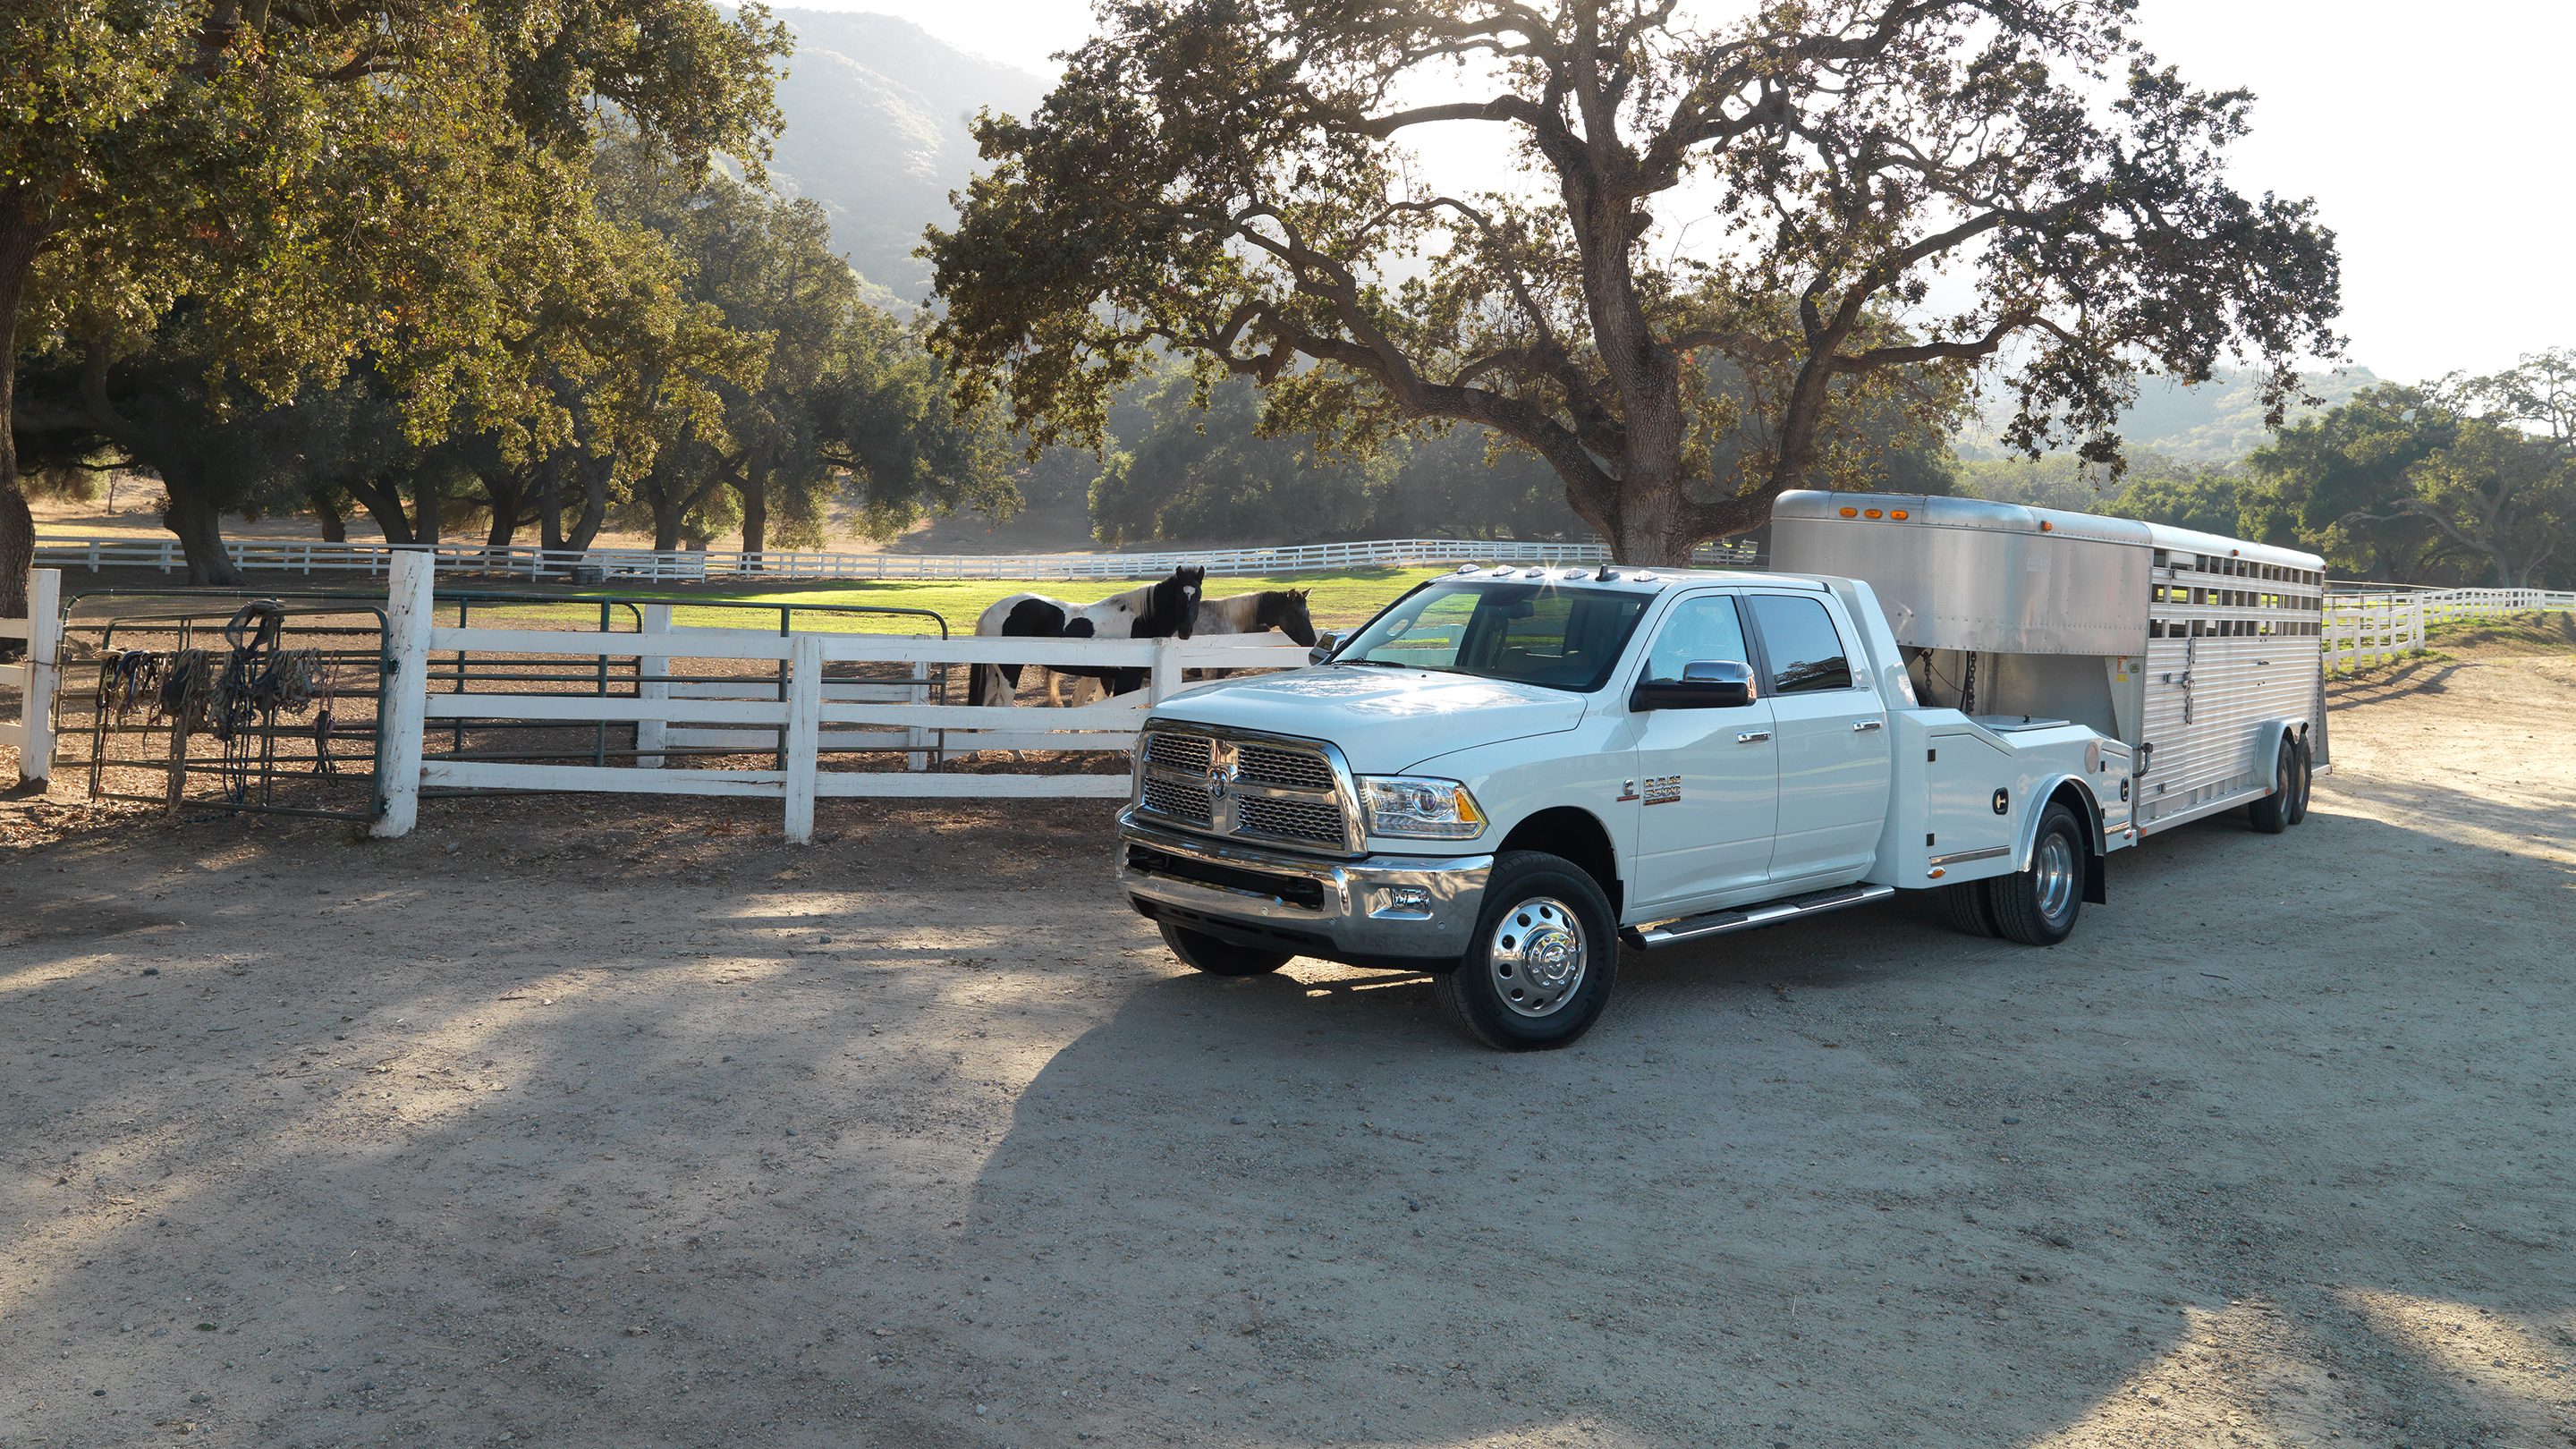 2017 Ram Chassis Cab Trailer Hauling Exterior